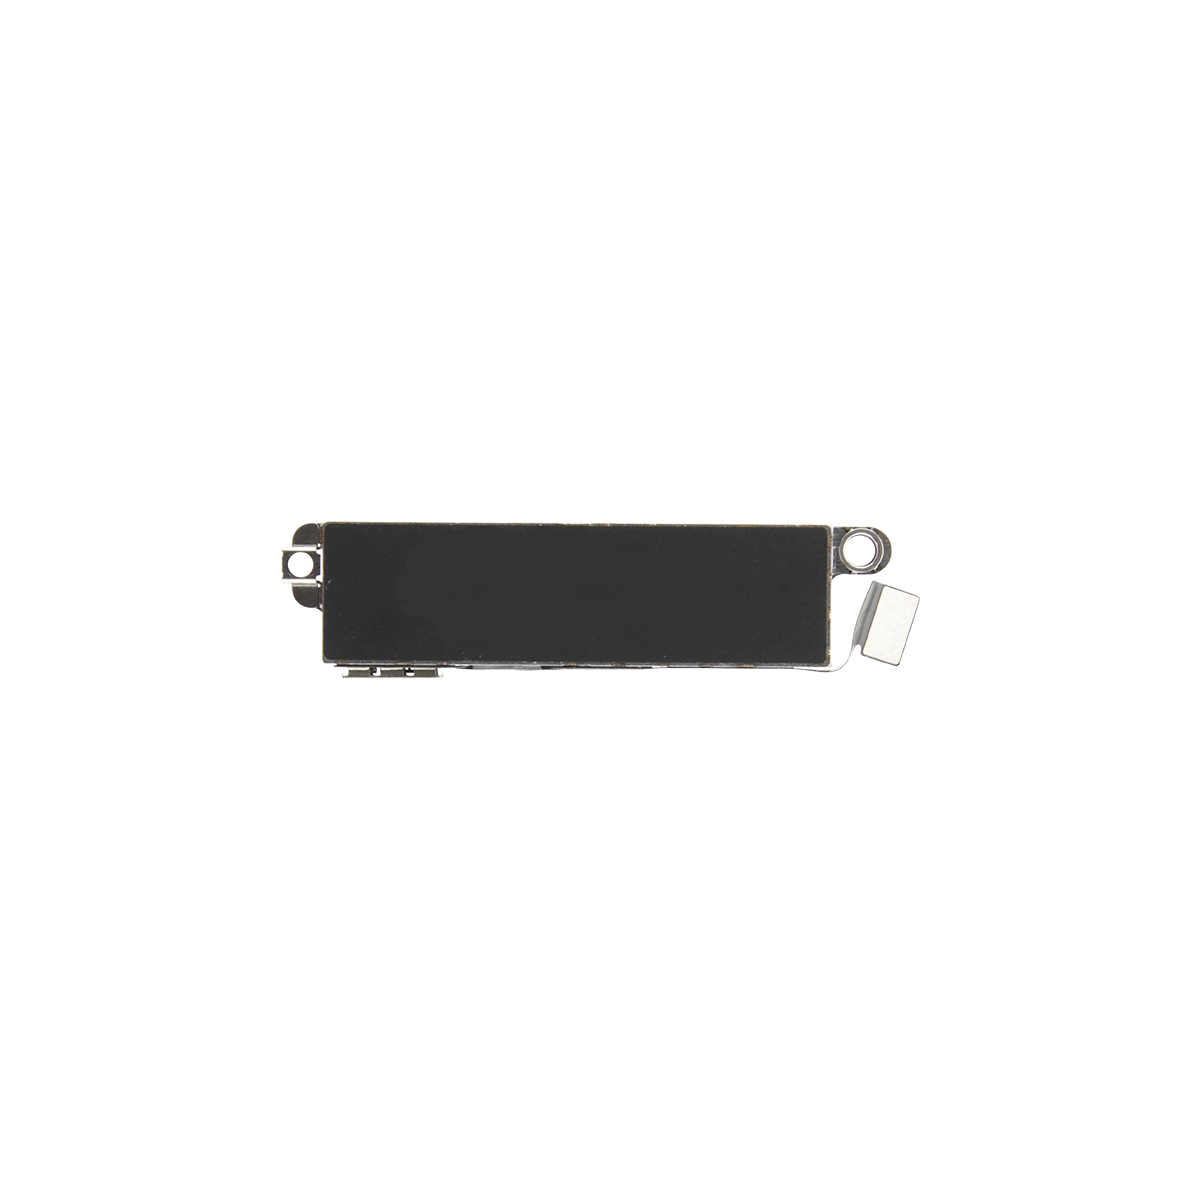 iPhone X / XR / 11 Vibrator (Taptic Engine) Replacement